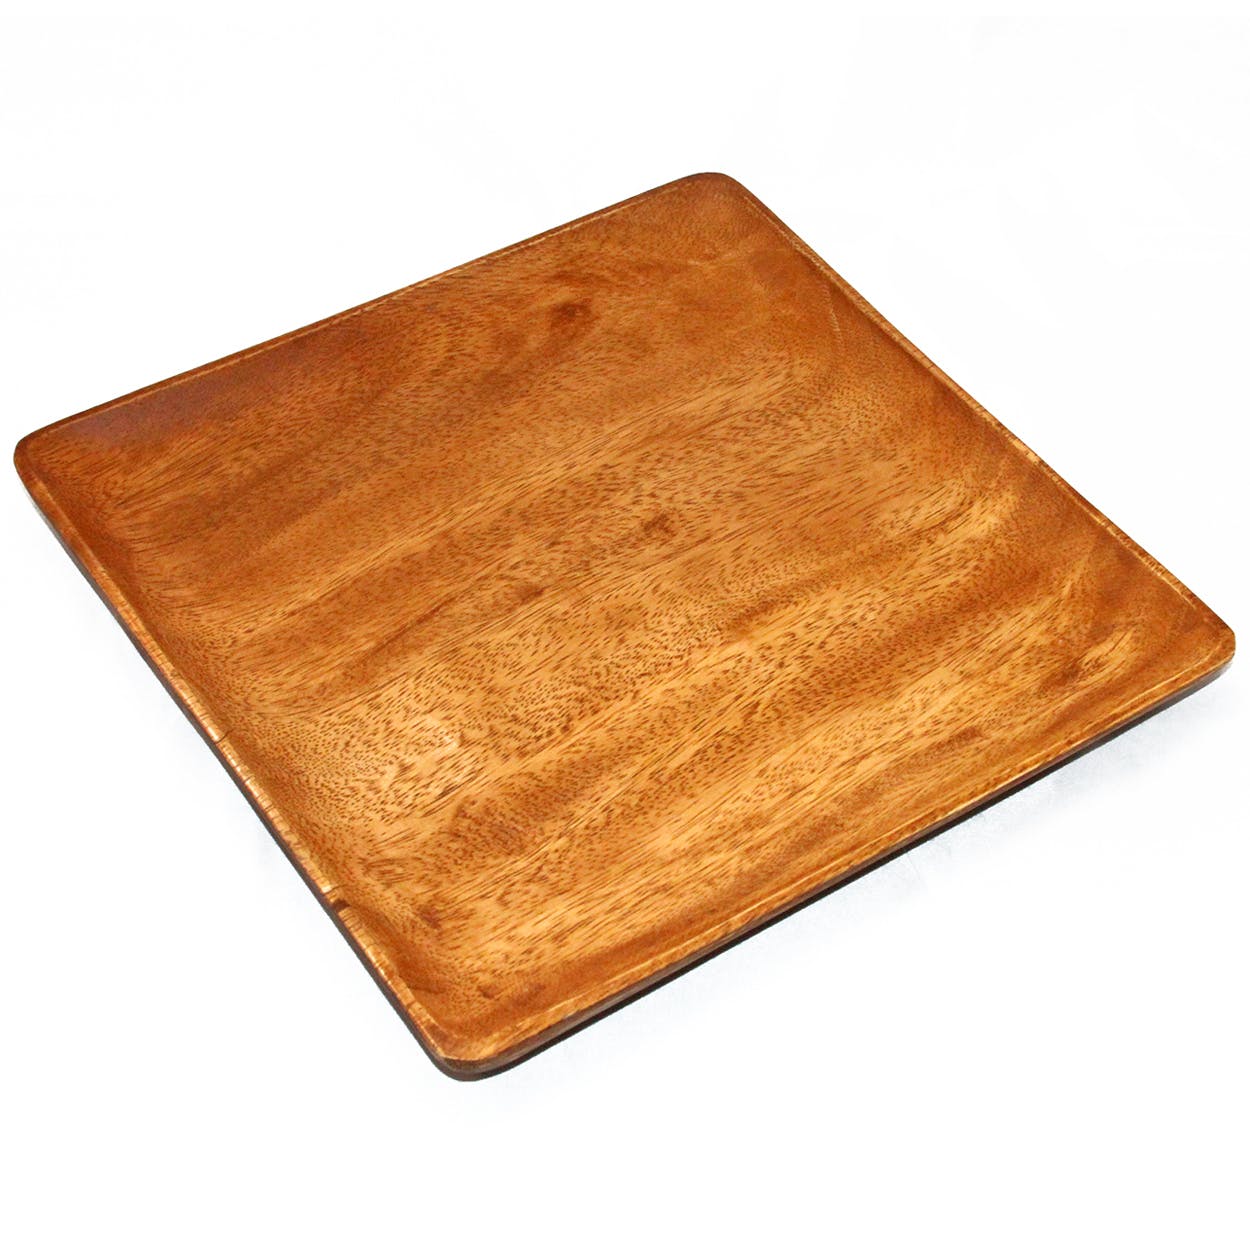 Hand- Crafted 10" x 10" Rolling Tray